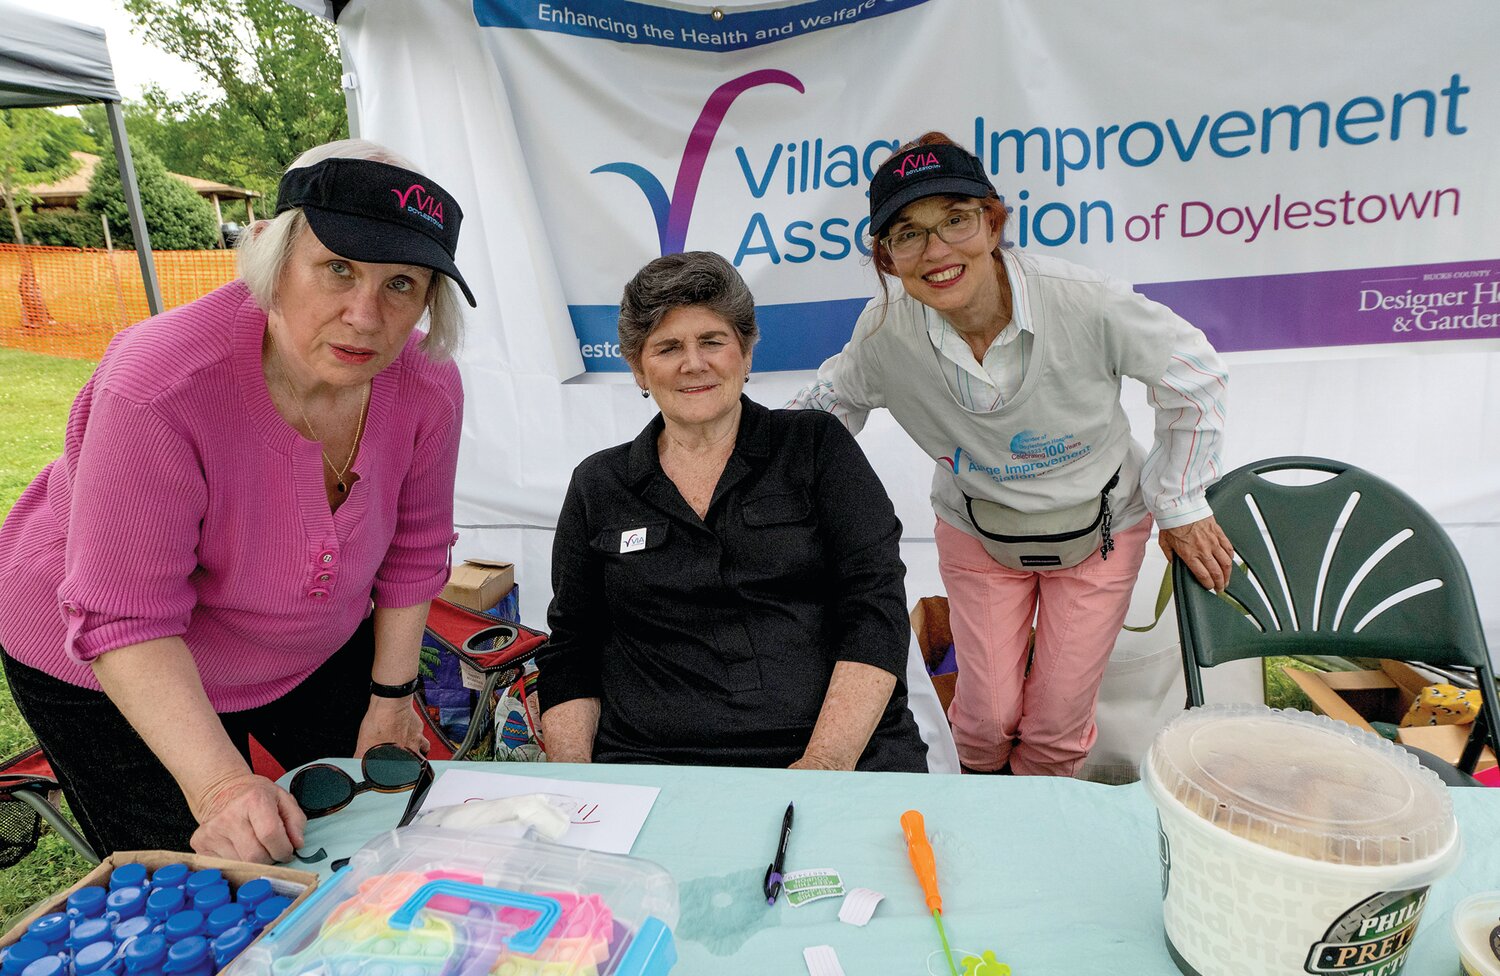 Members of the Village Improvement Association greet guests arriving at the Village Fair June 24.